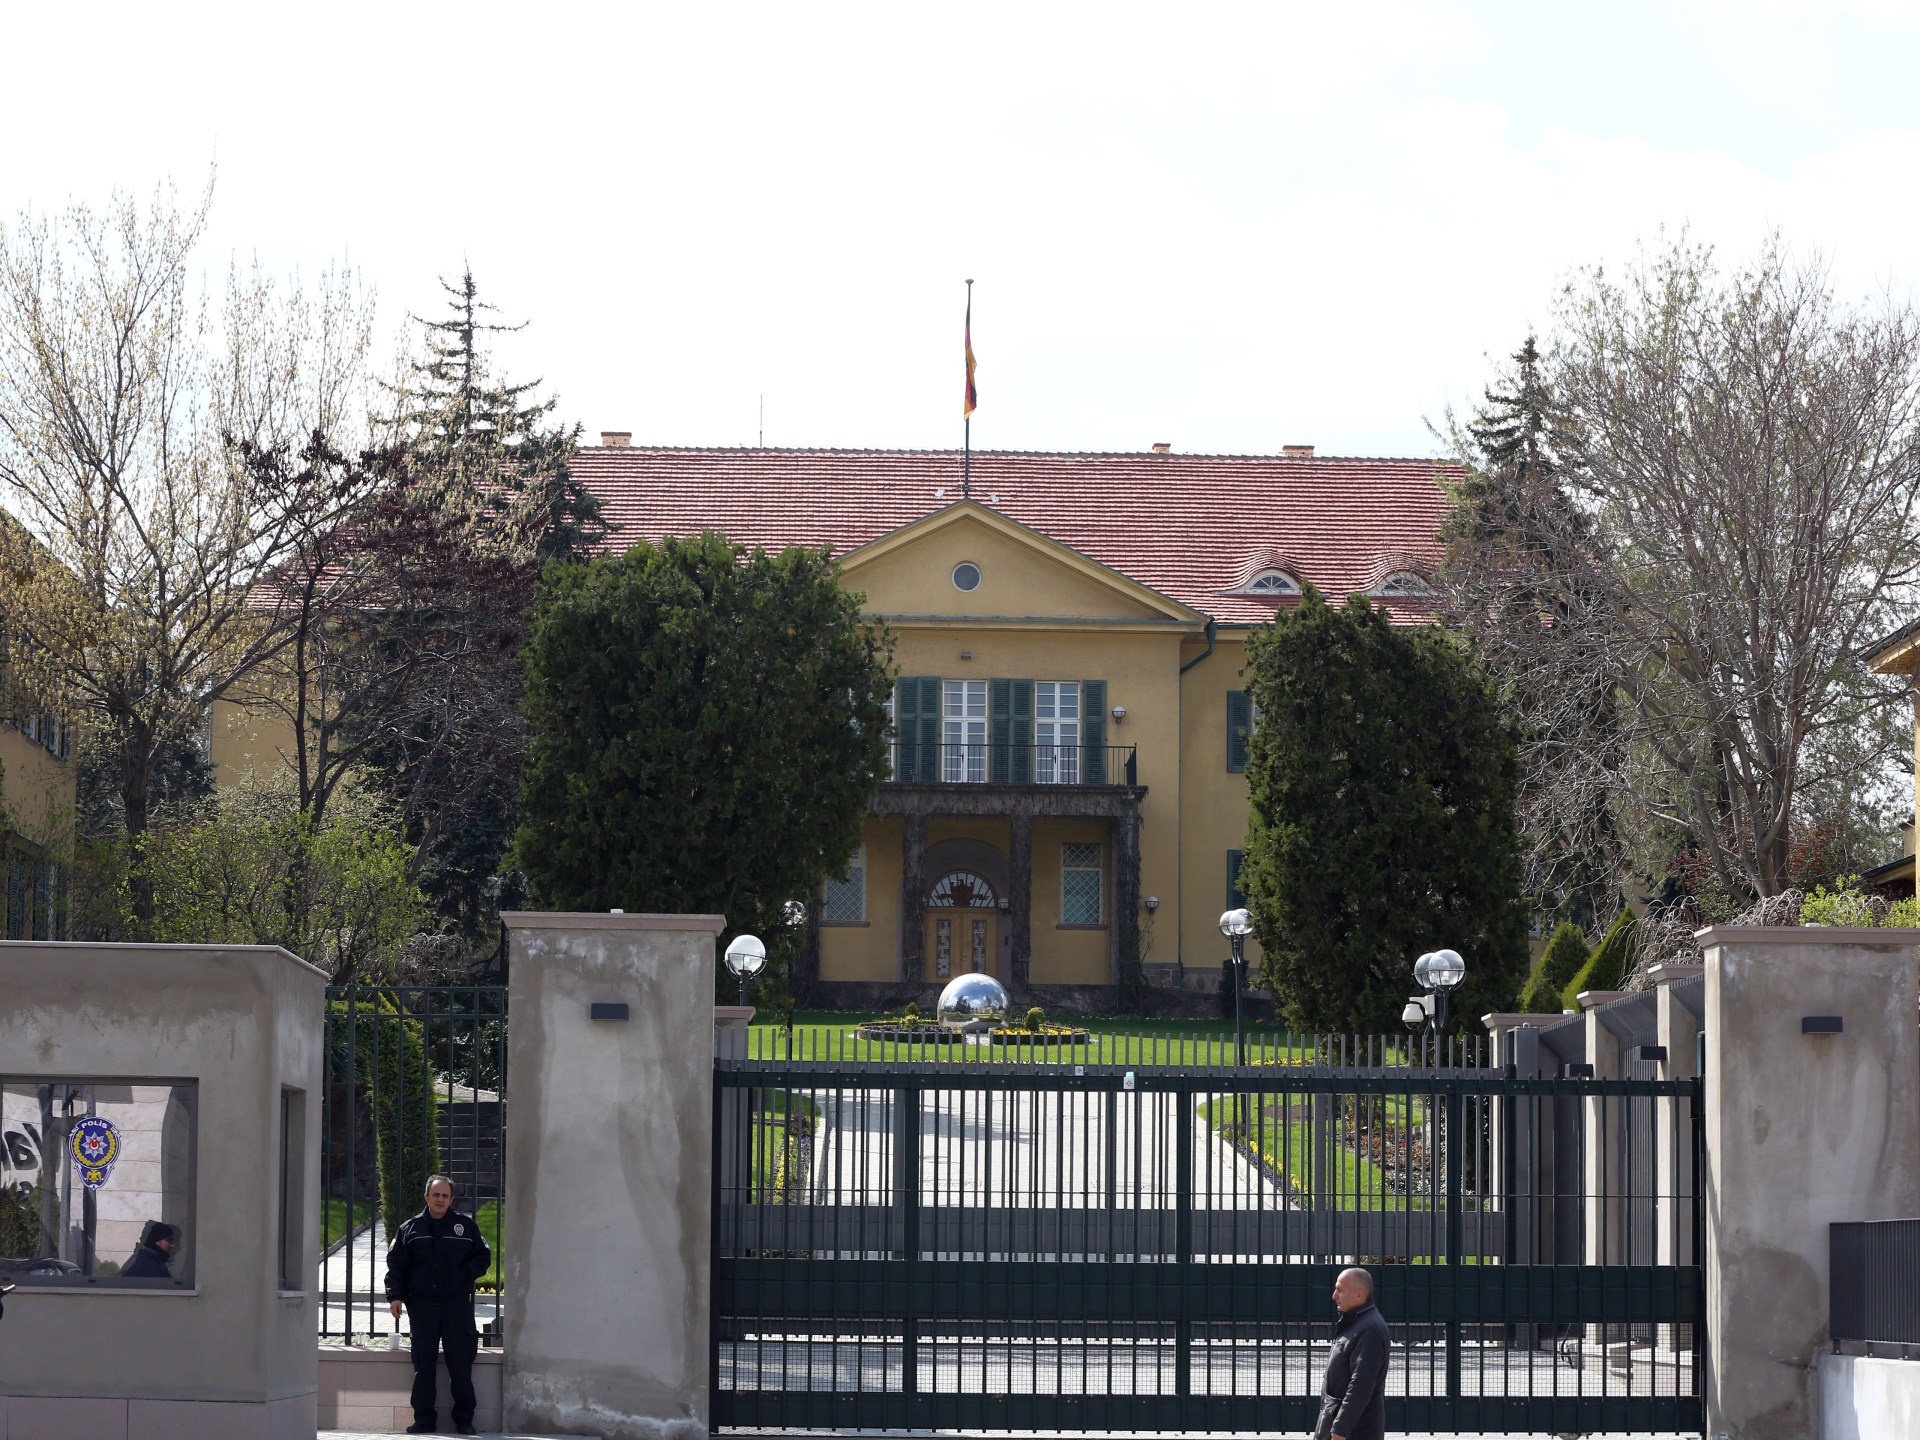 Turkey: No proof from Western nations after consulate closures